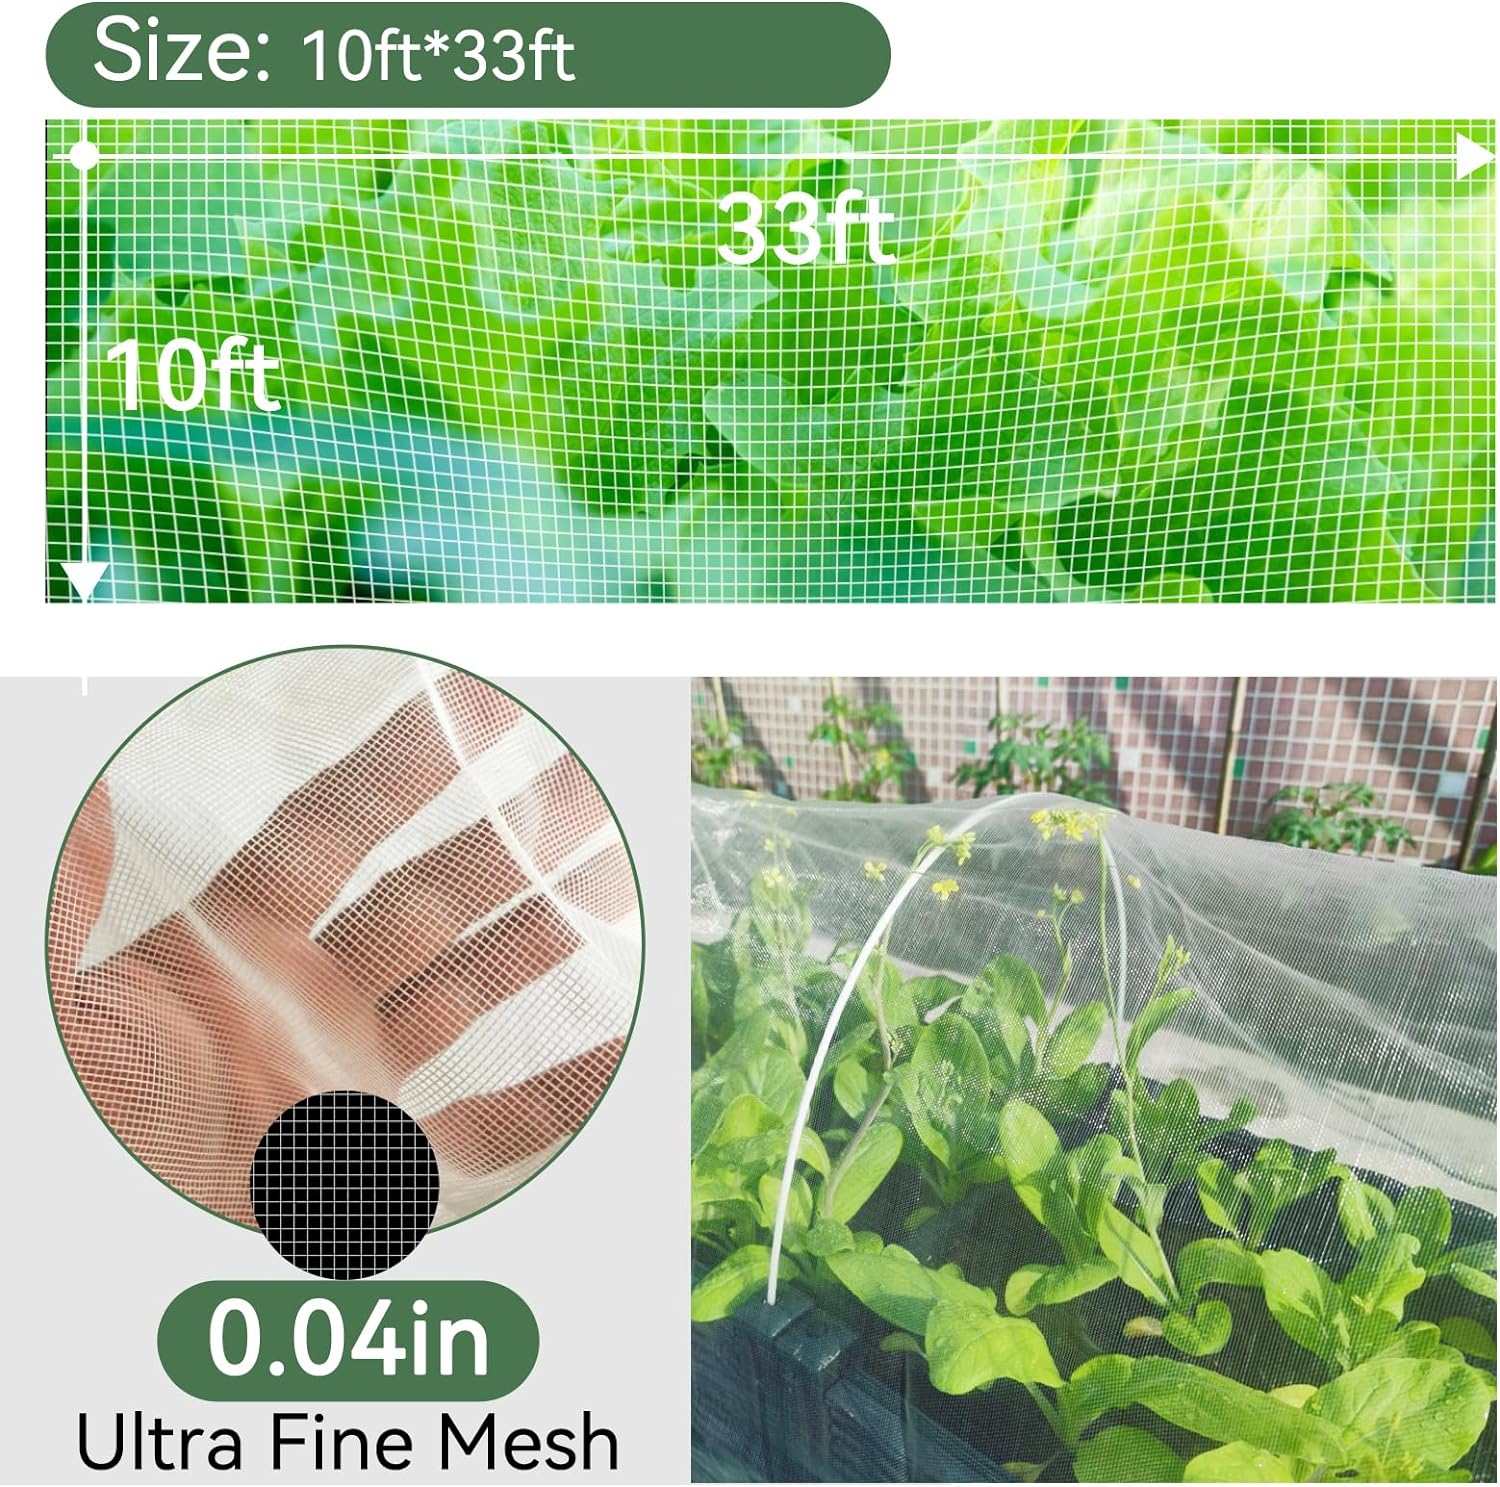 Amazon.com : ROMISA Garden Netting 10x33Ft, Ultra Fine Mesh Plant Netting Cover Pest Barrier Bird Mosquito Net, Plants Cover for Vegetables Fruits Flowers Crops, for use in Gardens courtyards and greenhouses ect. : Patio, Lawn  Garden